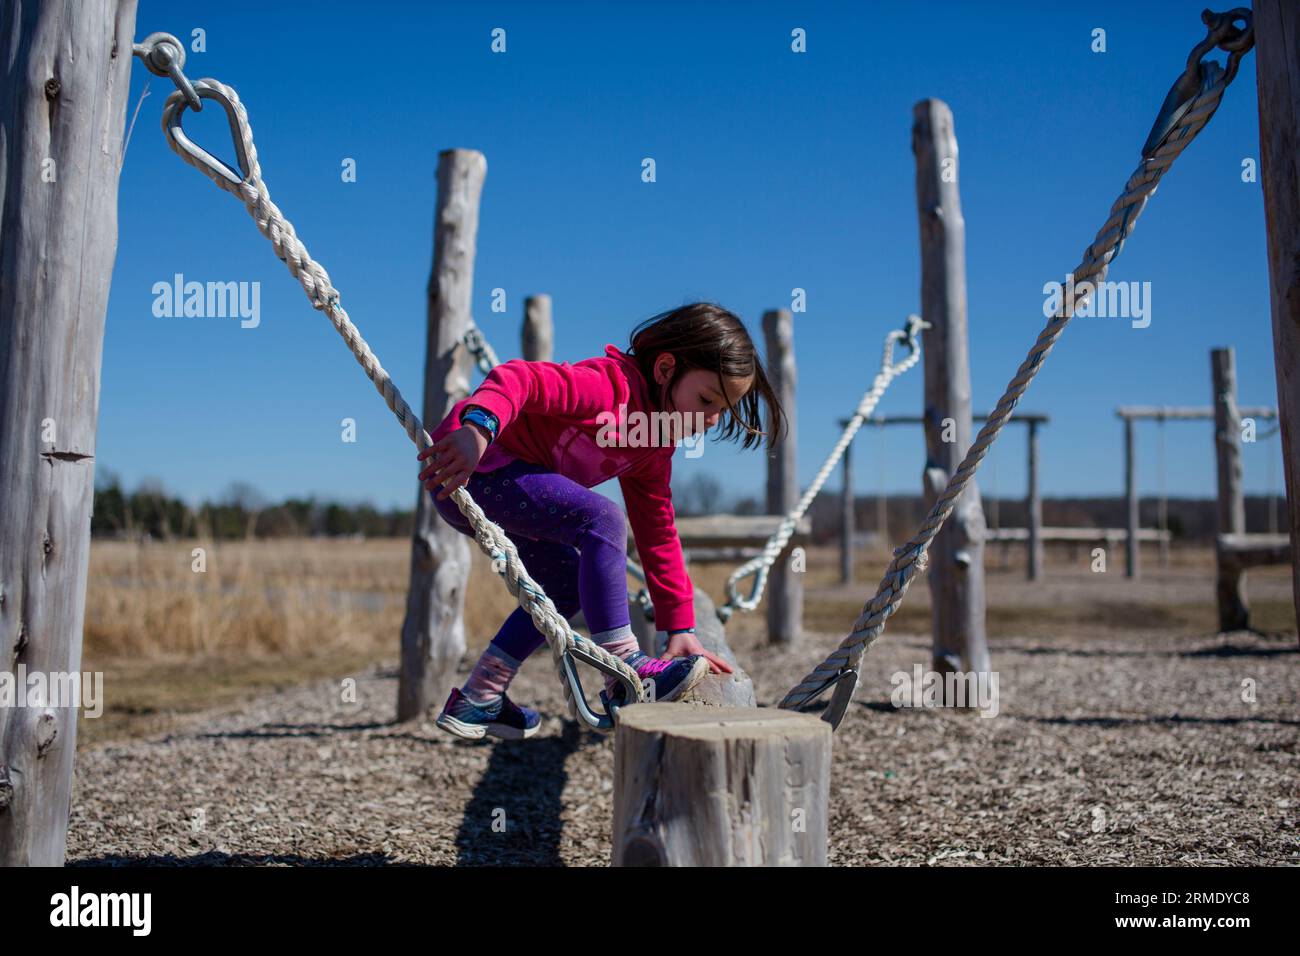 A little girl climbs onto a balance beam in an outdoor obstacle course Stock Photo